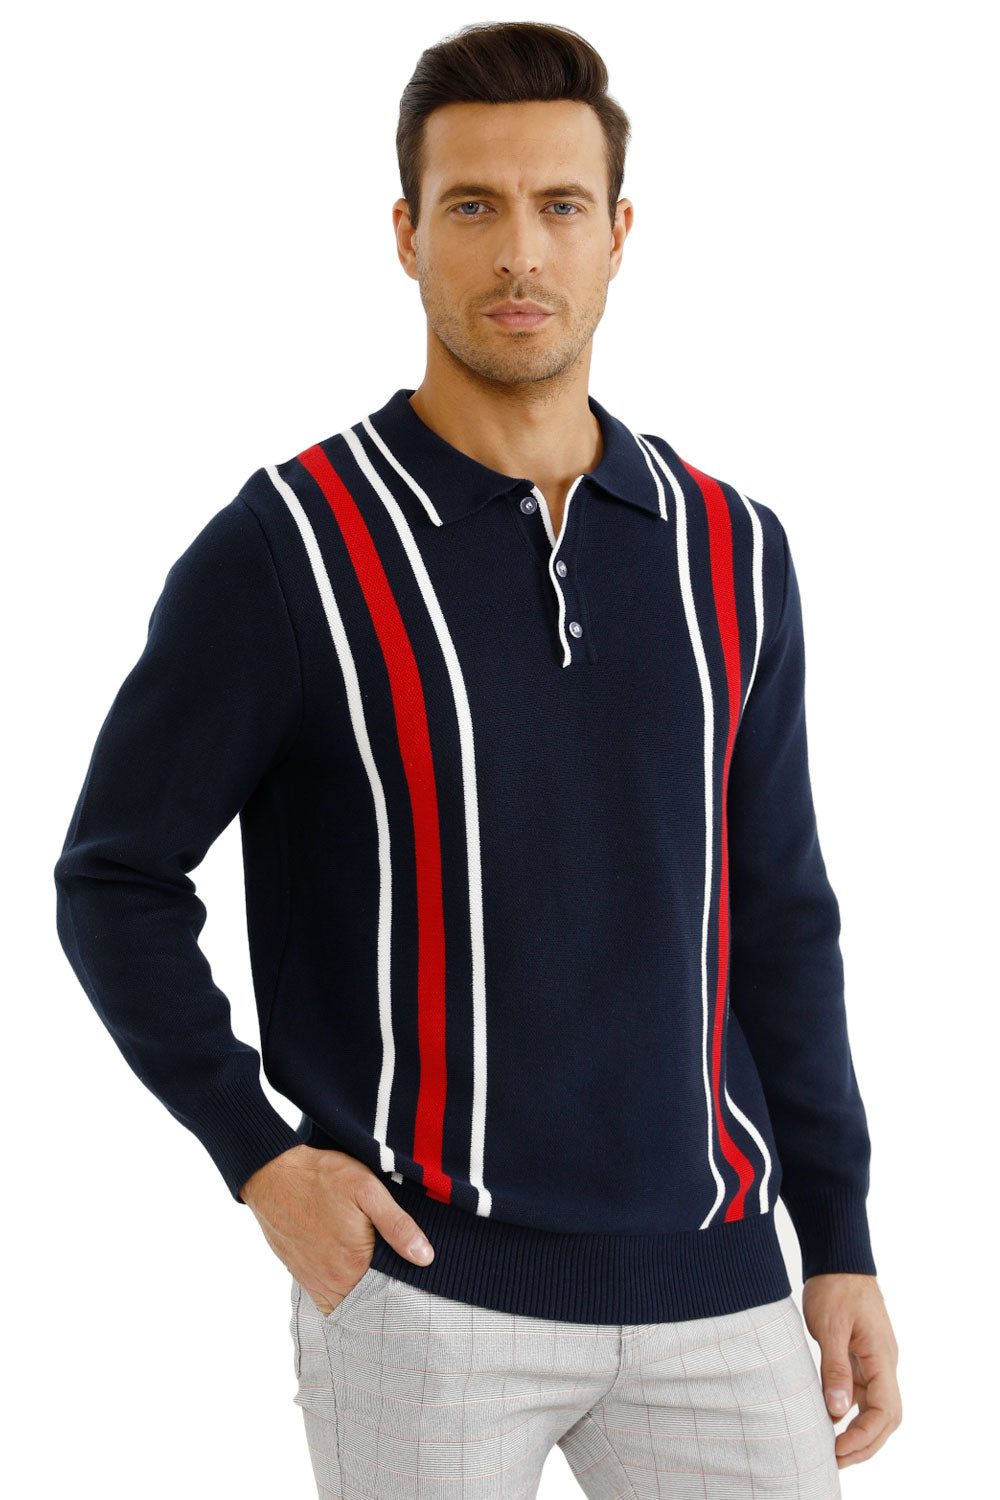 Gingtto Mens Long Sleeve Casual Button Knitted Slim Fit Sweaters